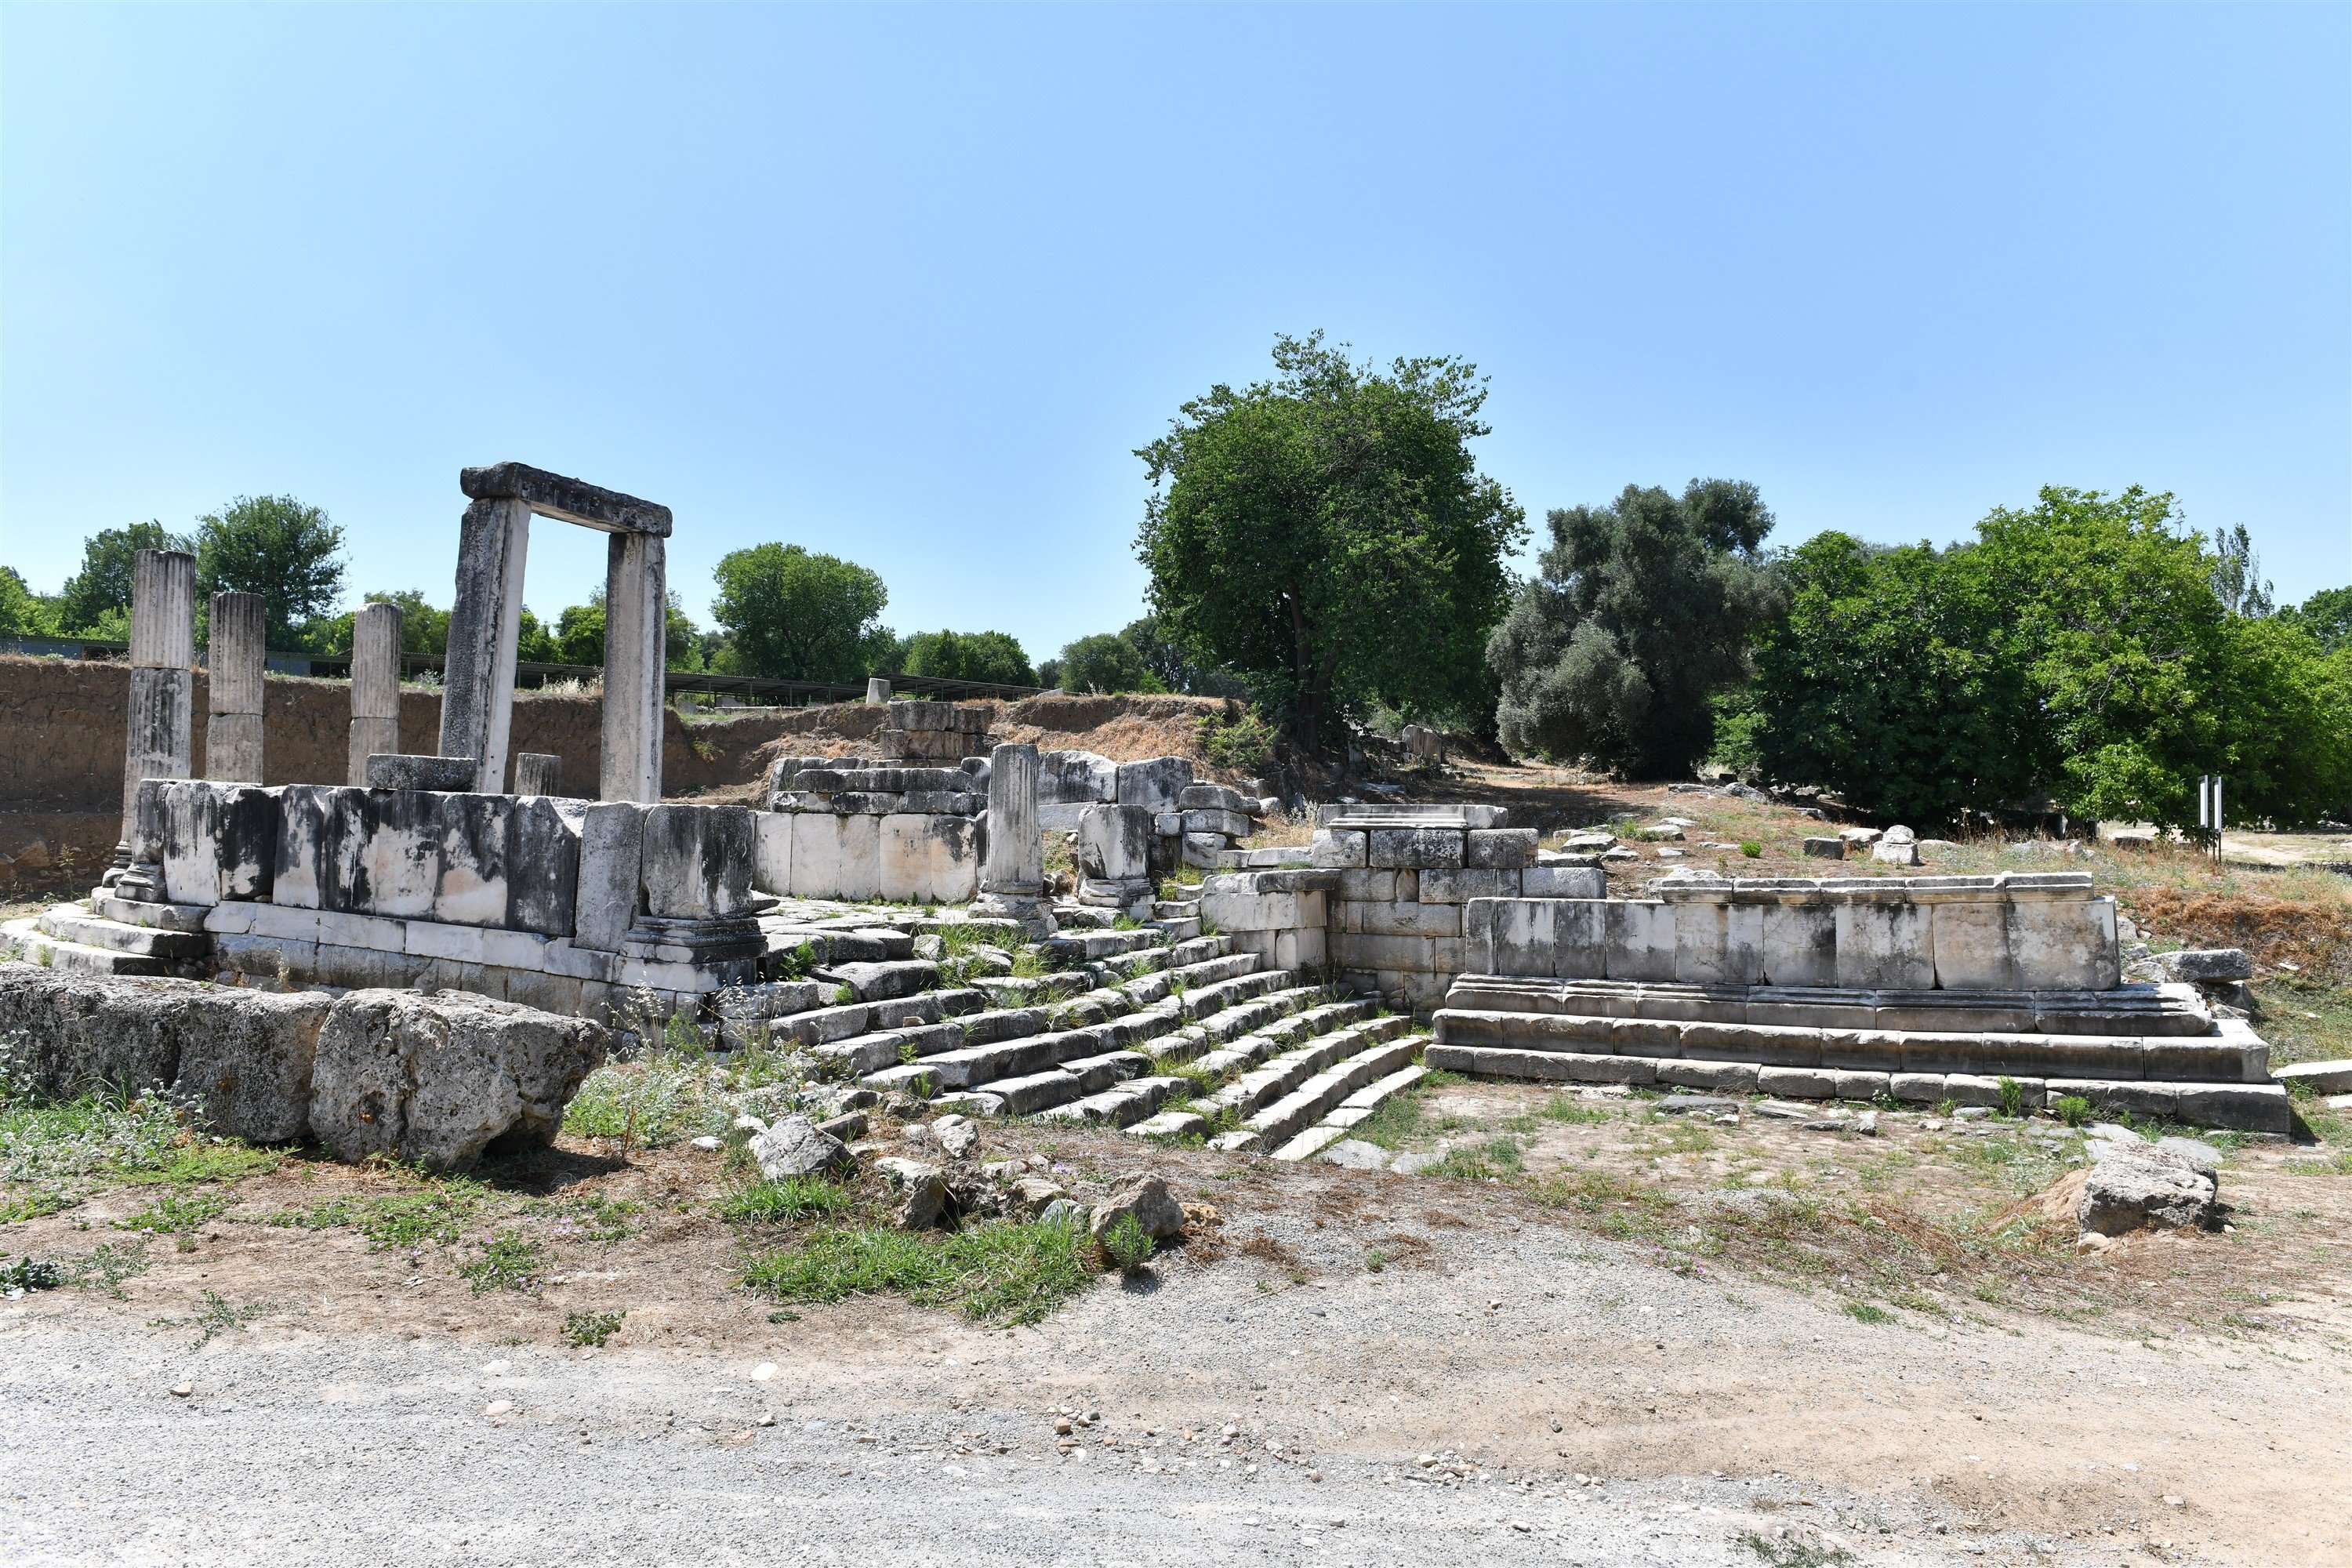 A view from the ancient city of Stratonikeia, Muğla, southwestern Turkey.